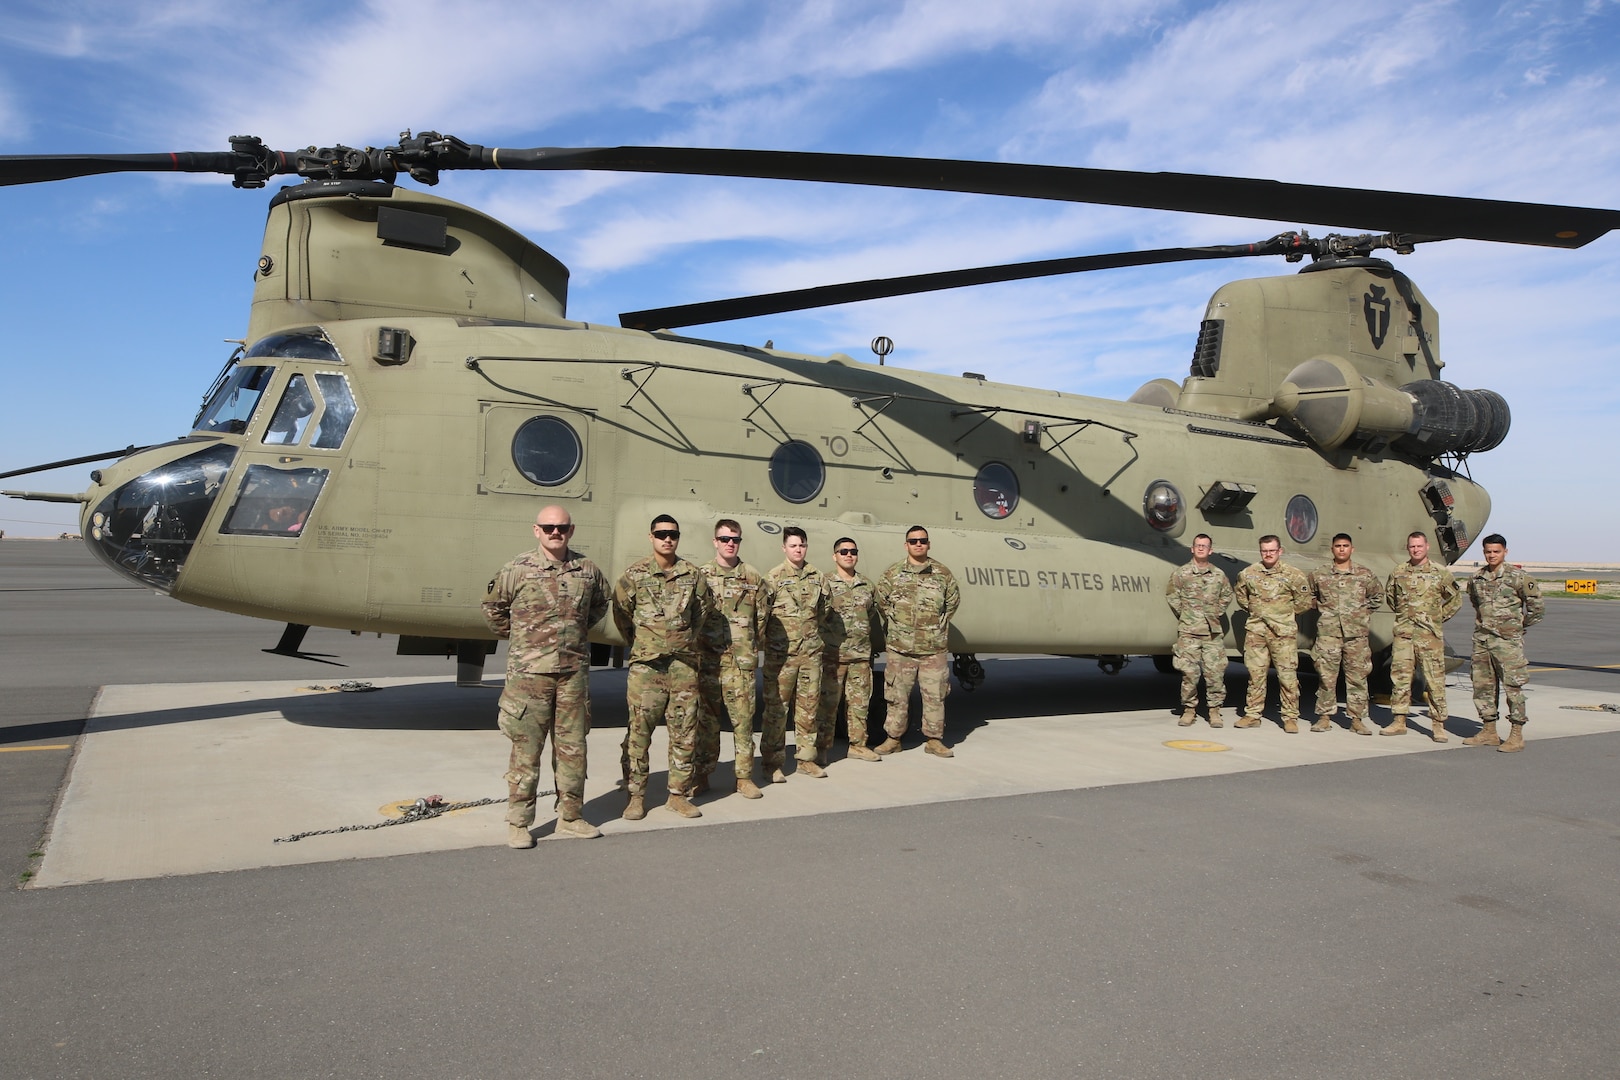 U.S. Army aviation maintenance Soldiers from Delta Company, 2nd Battalion, 149th Aviation Regiment, General Support Aviation Battalion, 36th Combat Aviation Brigade, "Task Force Mustang," gather in front of a readied CH-47F Chinook helicopter at the Udairi Landing Zone in Camp Buehring, Kuwait, Feb. 18, 2023. Left to right: Spc. Jacob Hess, Pfc. Kaleb Fegurgur, Sgt. Adam Scheef, Spc. Sydney McElhany, Spc. Jacob Carreon, Spc. Jorge Gonzalez, Spc. Matthew Glover, Spc. Austin Chancellor, Spc. Louie Chacon, Staff Sgt. Nicholas Schupe, and Sgt. Kevin Vasquez.